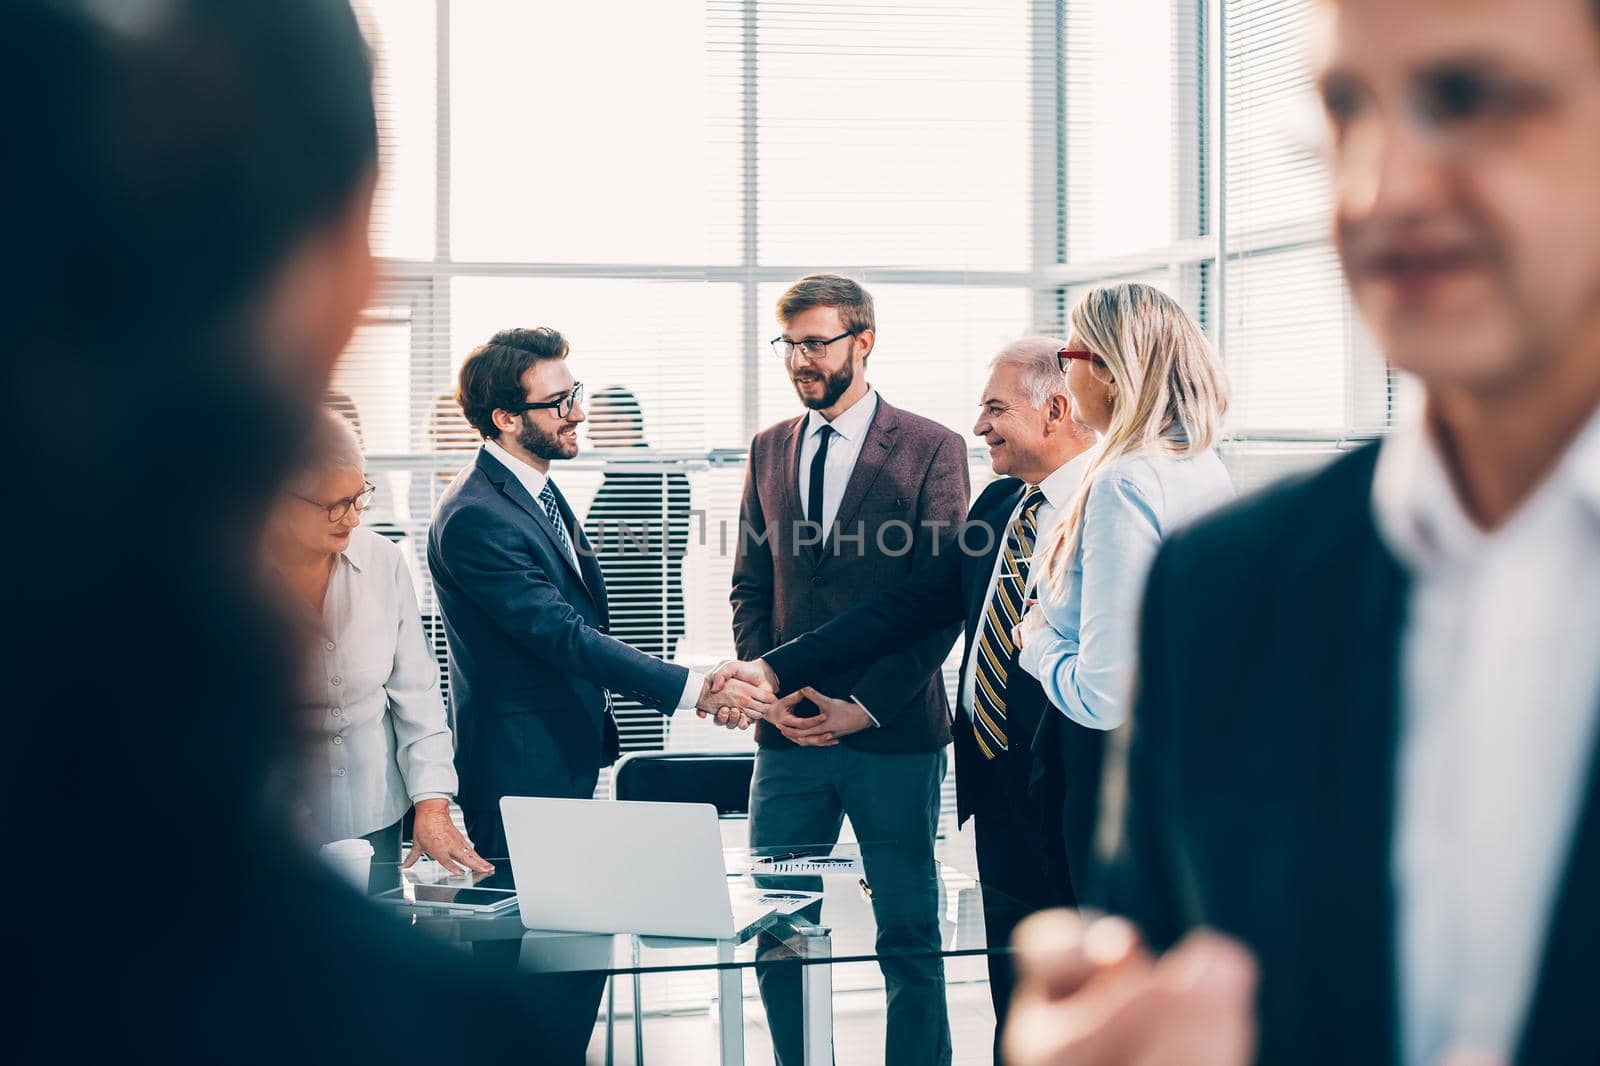 close up. business partners meeting each other with a handshake. business concept